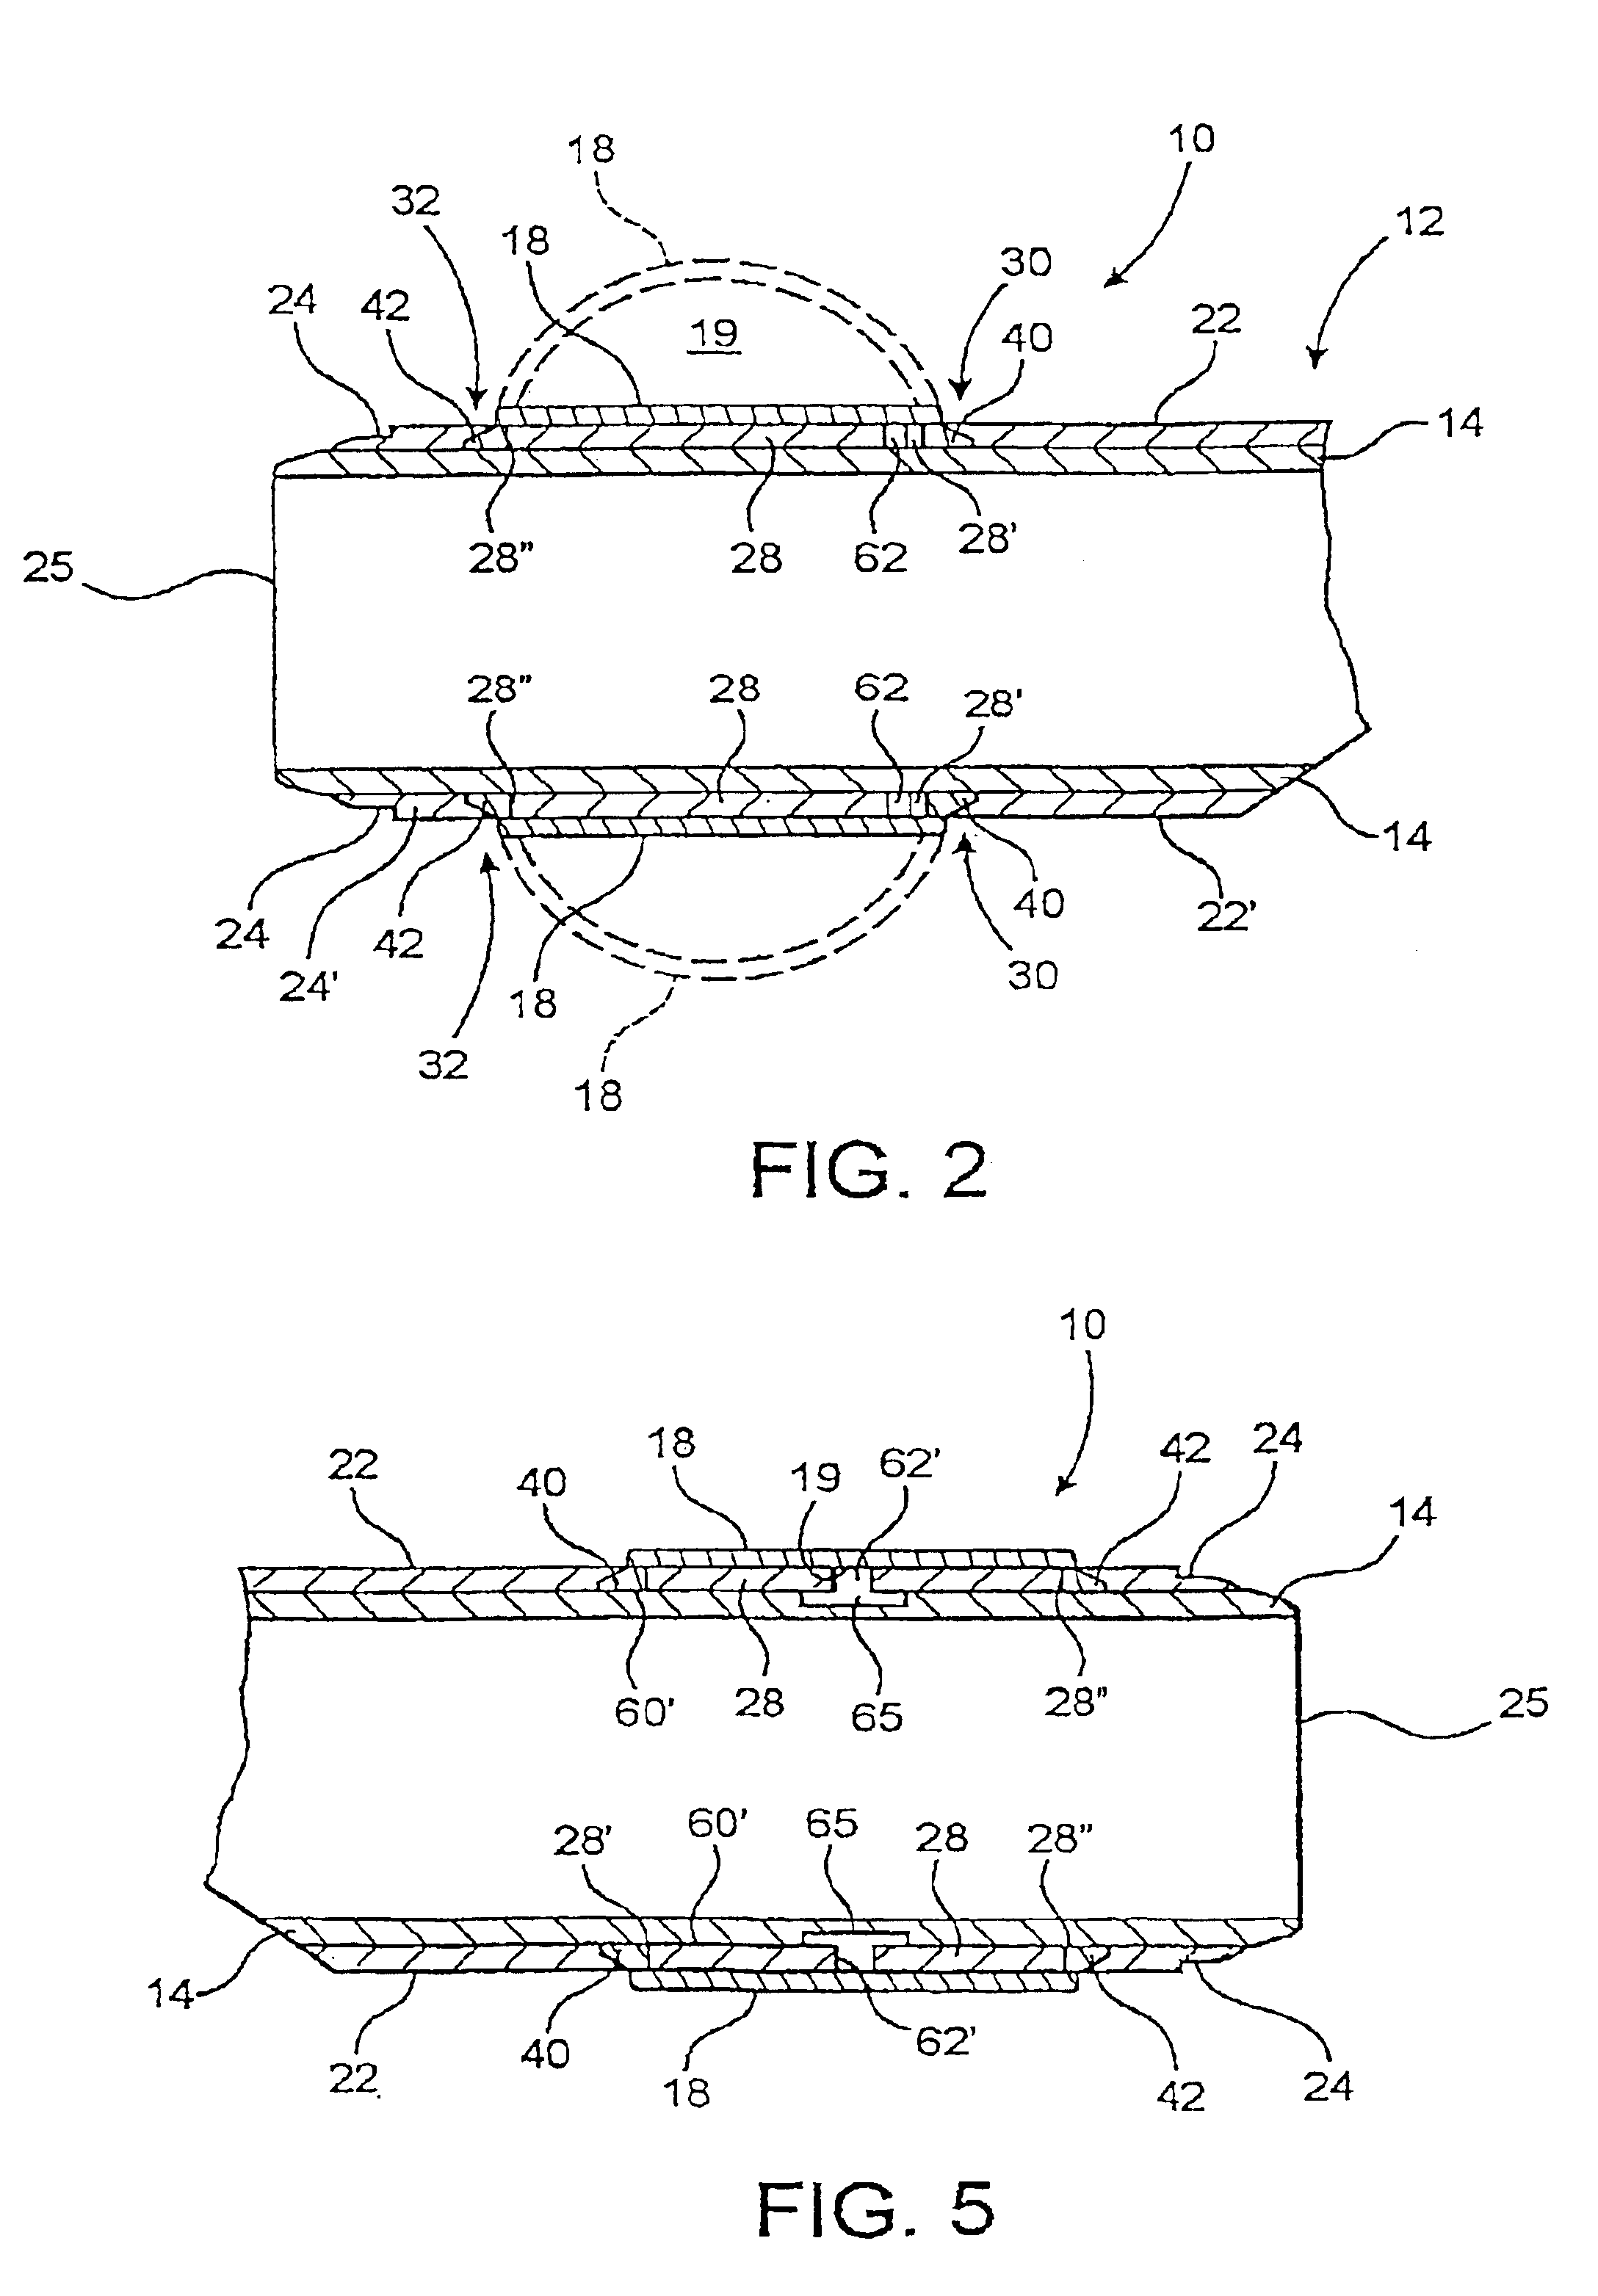 Anchoring assembly for a medical instrument